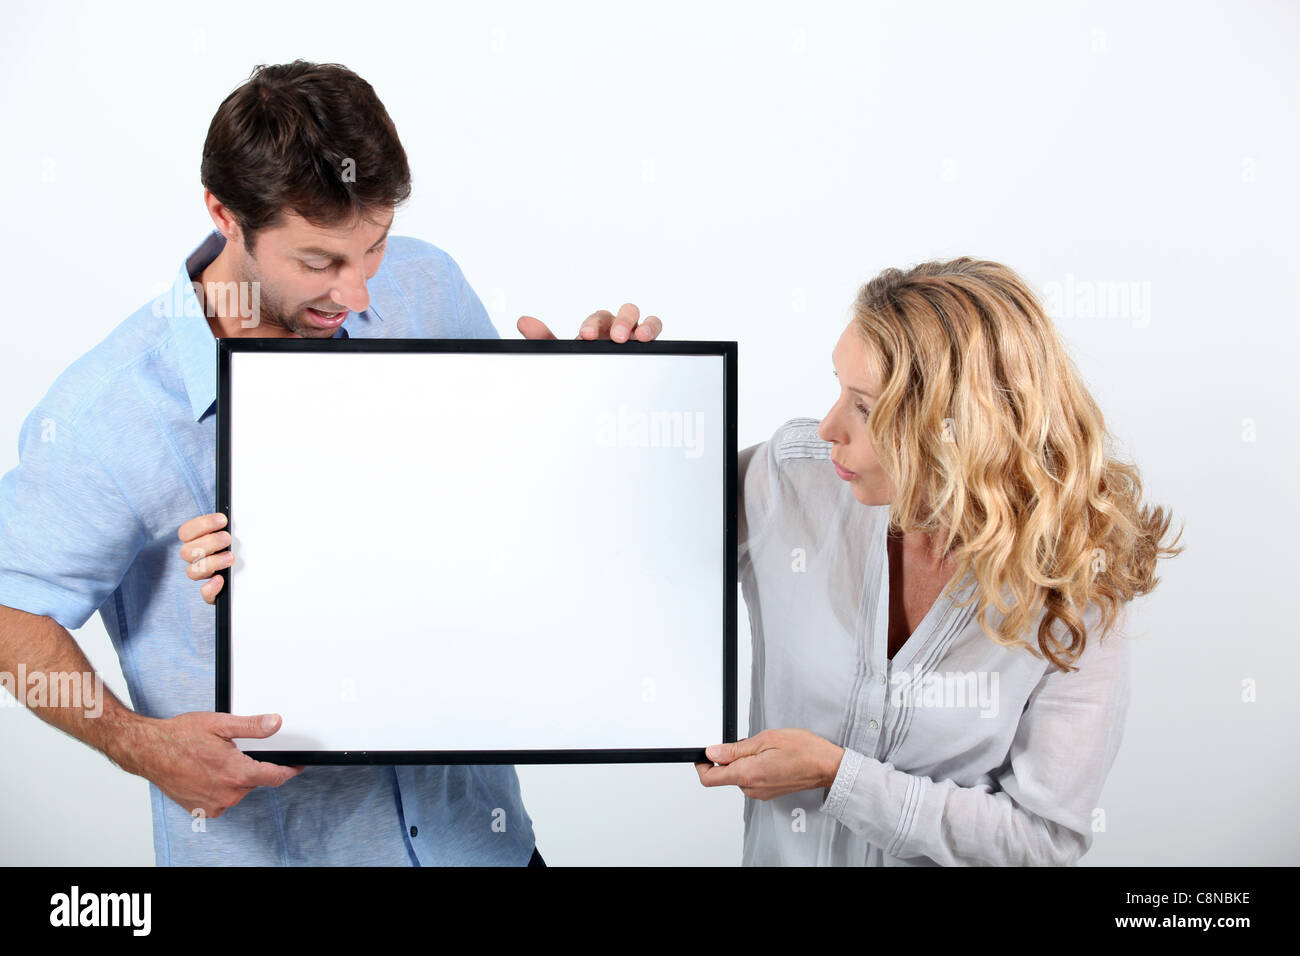 Man and woman astounded by a board left blank for your image Stock Photo